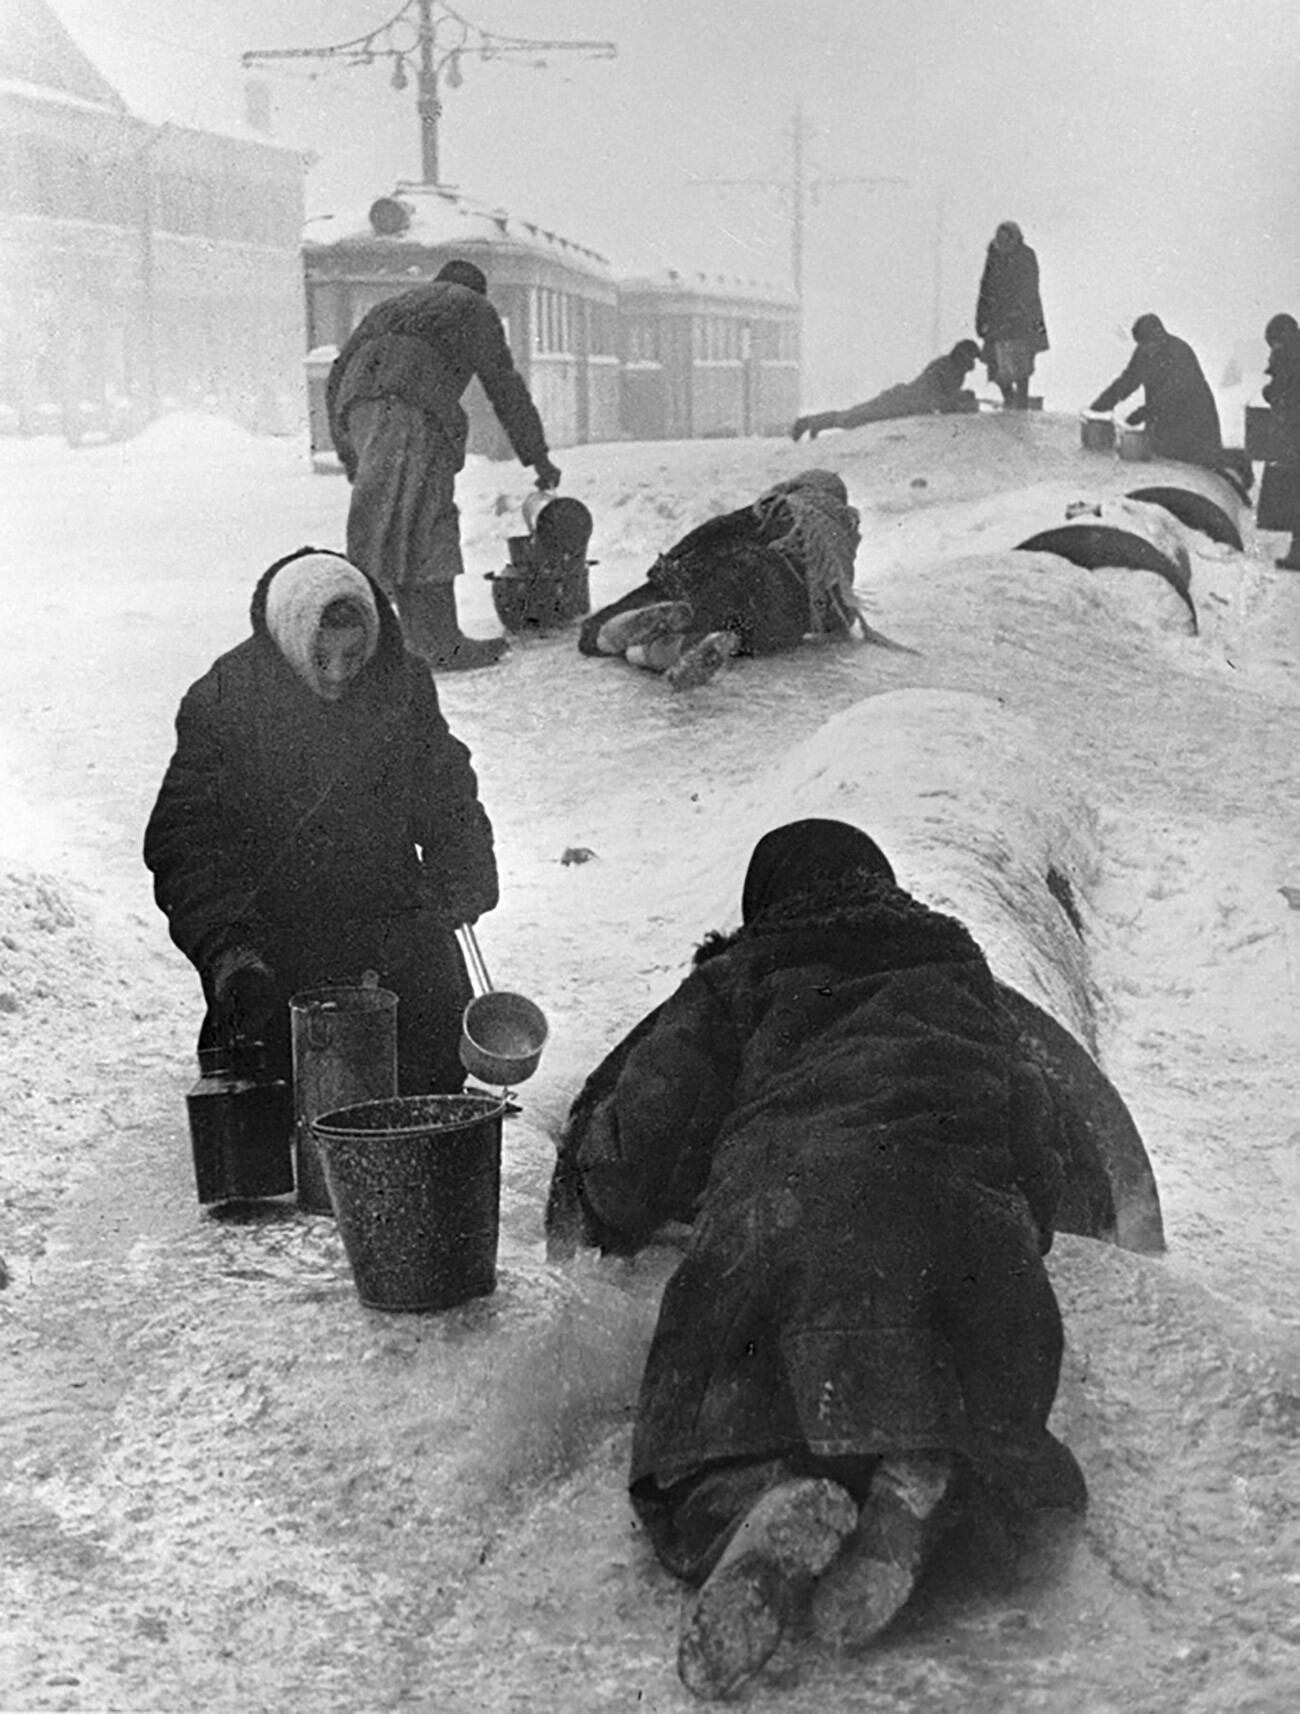 Leningrad residents draw water from a broken water pipe on an icy street.